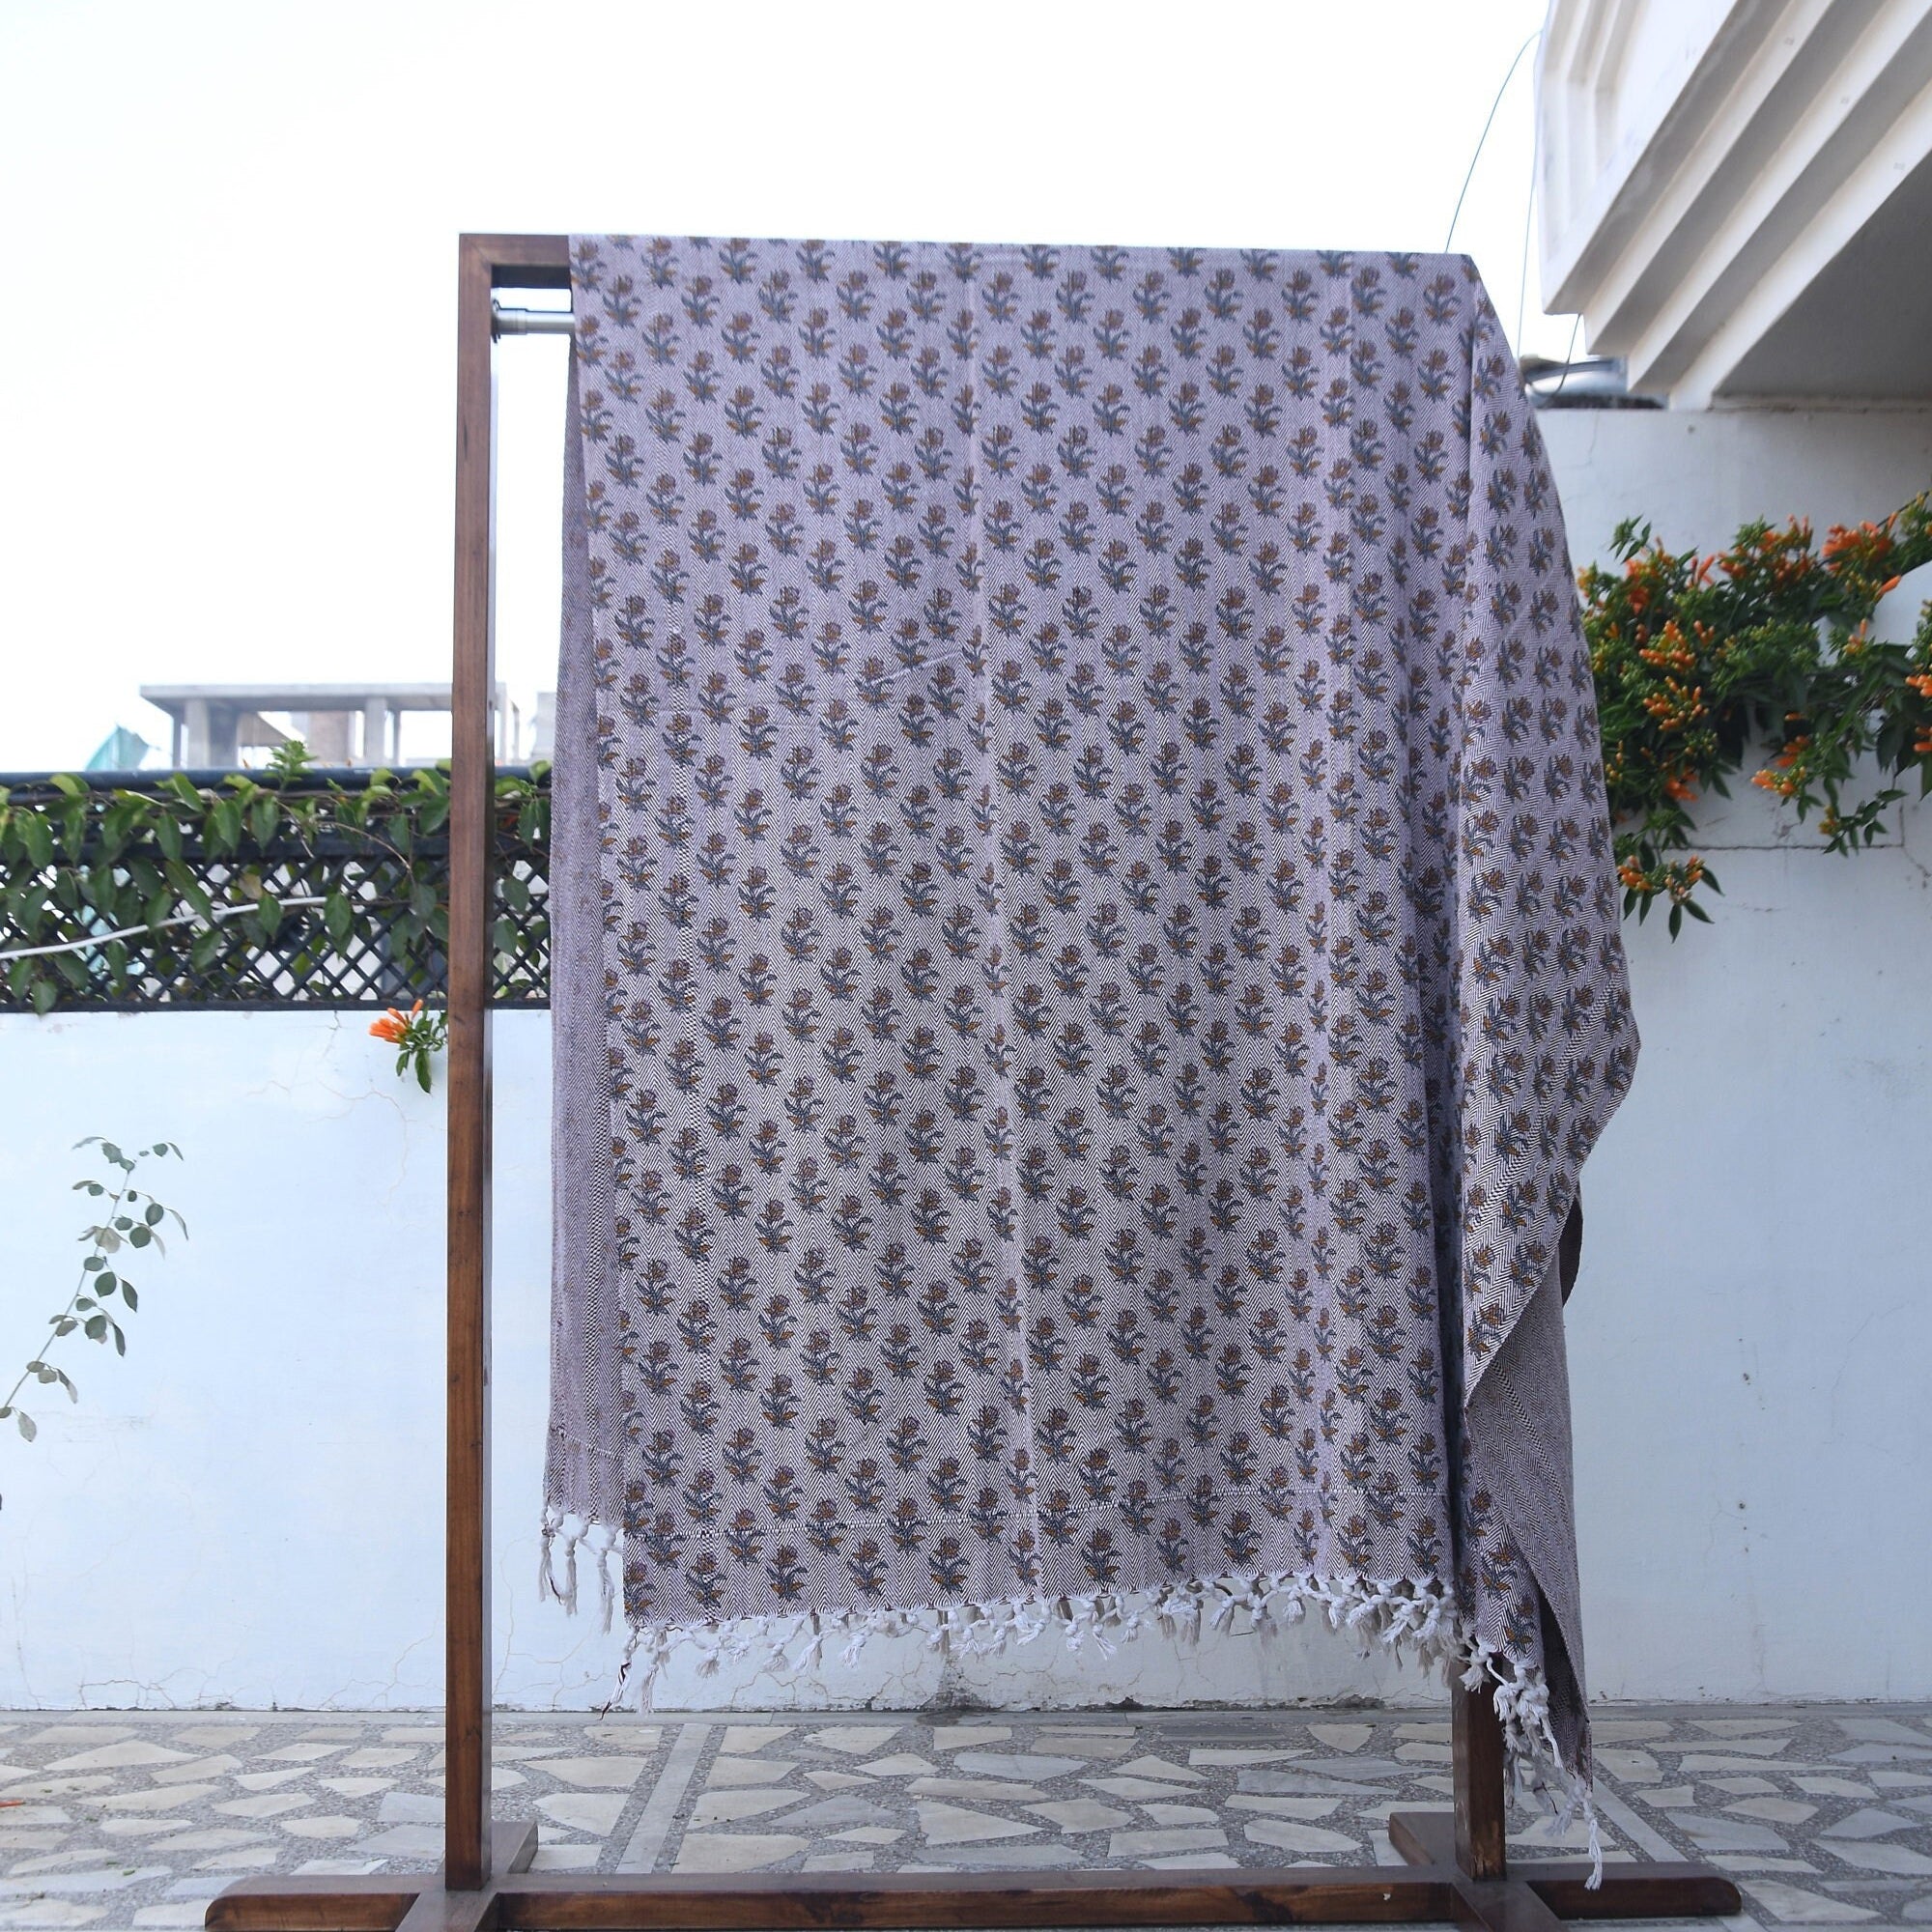 Blankets and Throws, Handwoven Block Print Throws - Handmade Blankets - Handwoven Handloom Fabric - COASTAL TULIP